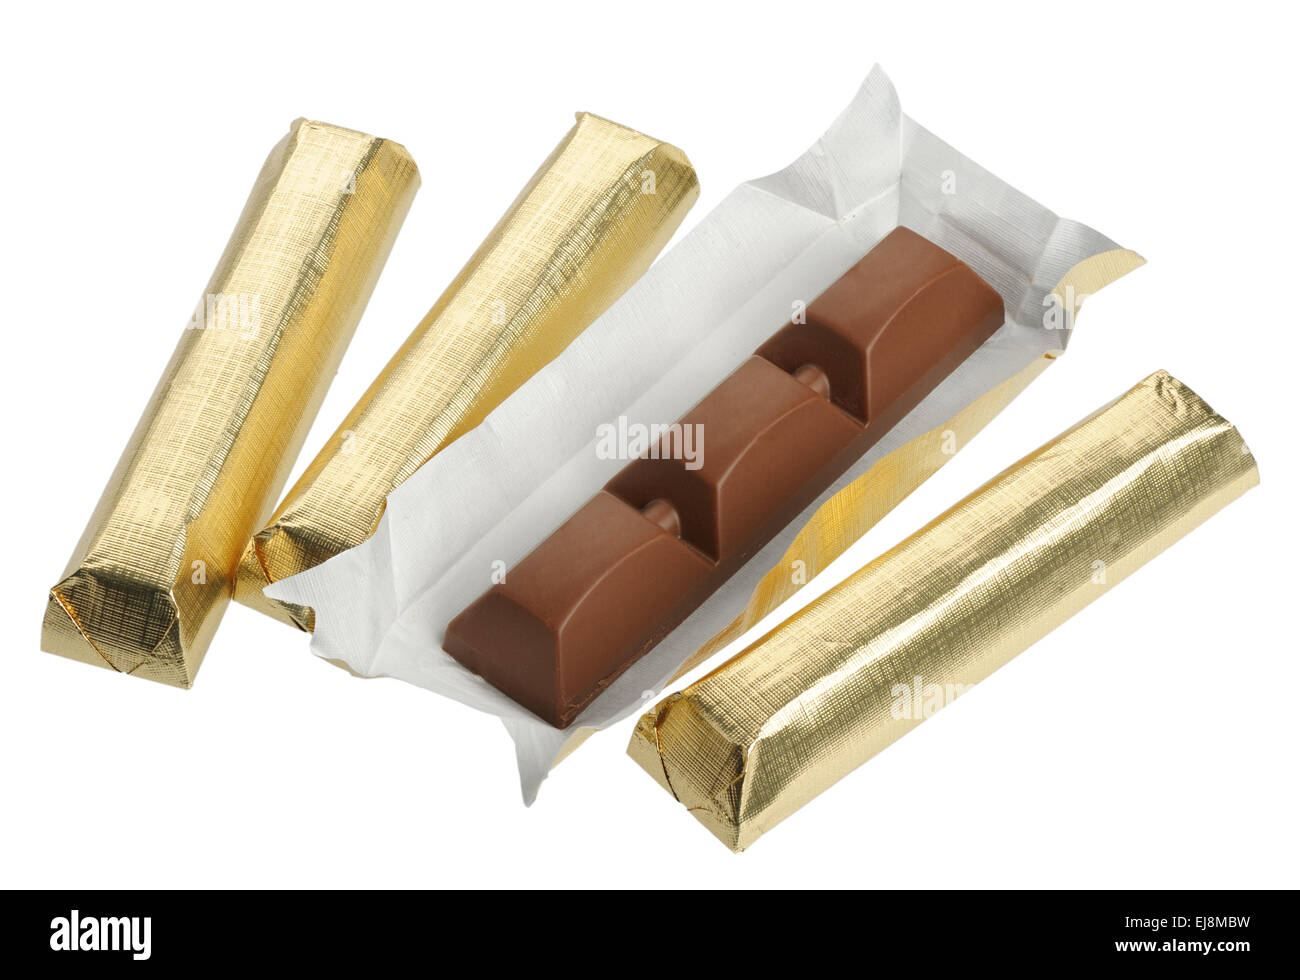 Chocolate in foil, isolated Stock Photo